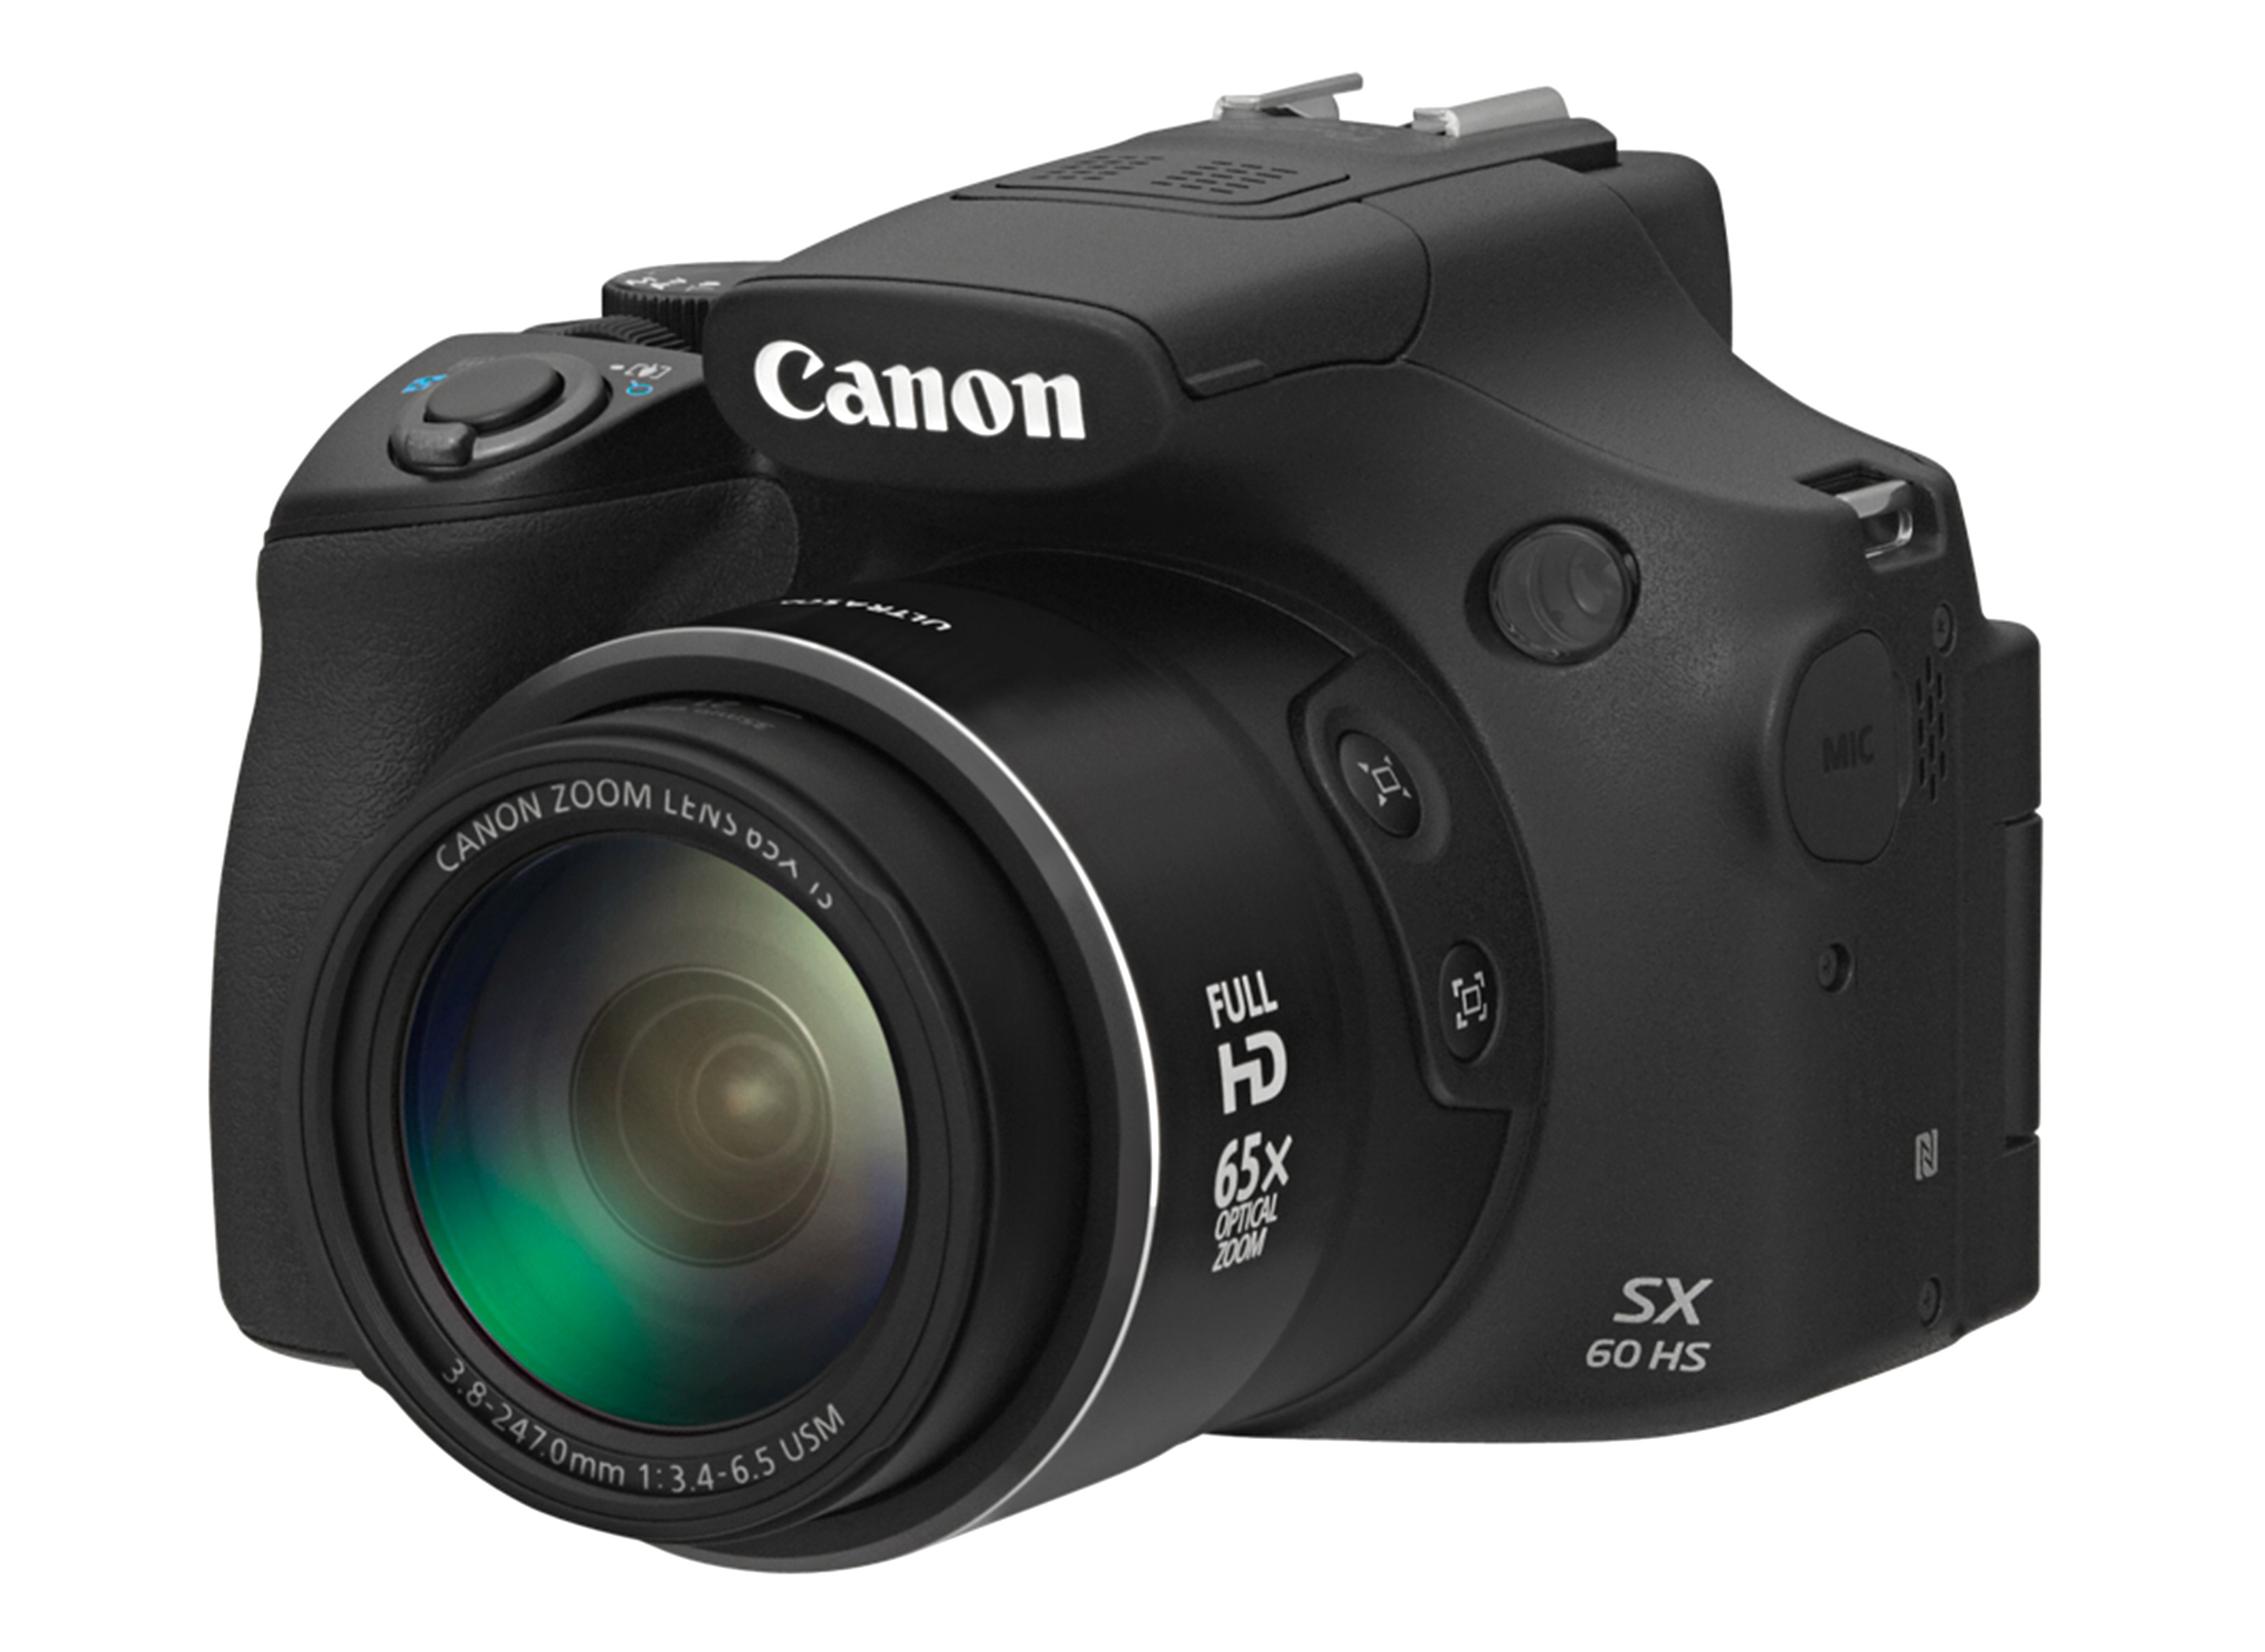 Canon PowerShot SX60 HS Camera Review - Consumer Reports